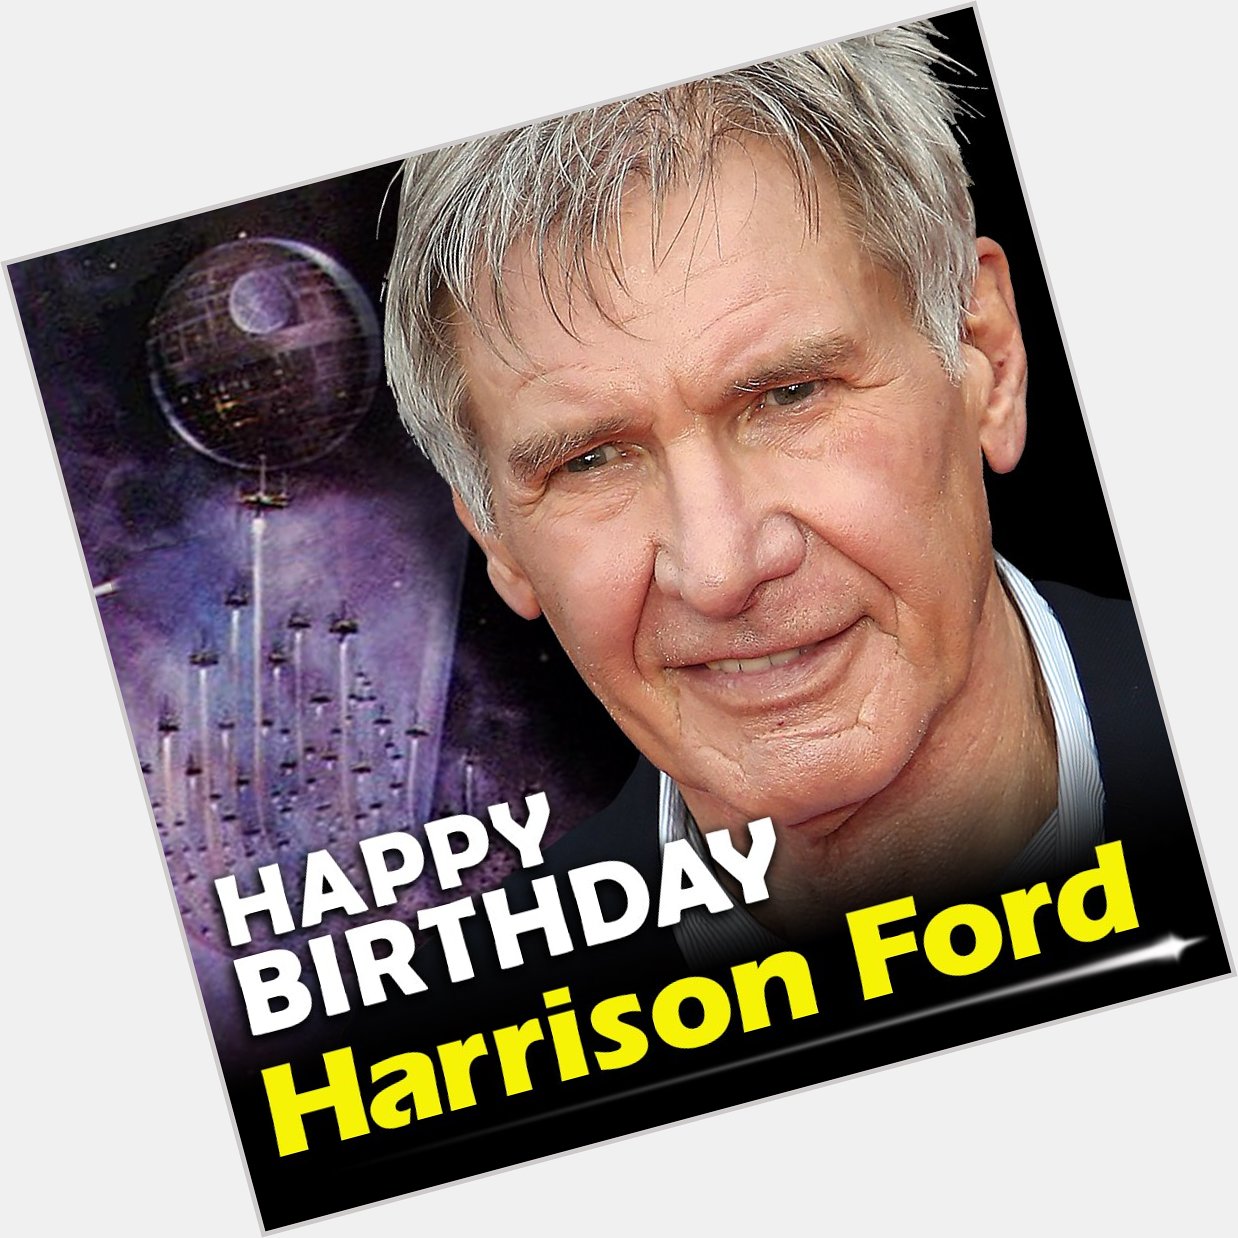 Happy birthday to Harrison Ford! The actor turns 75 today 